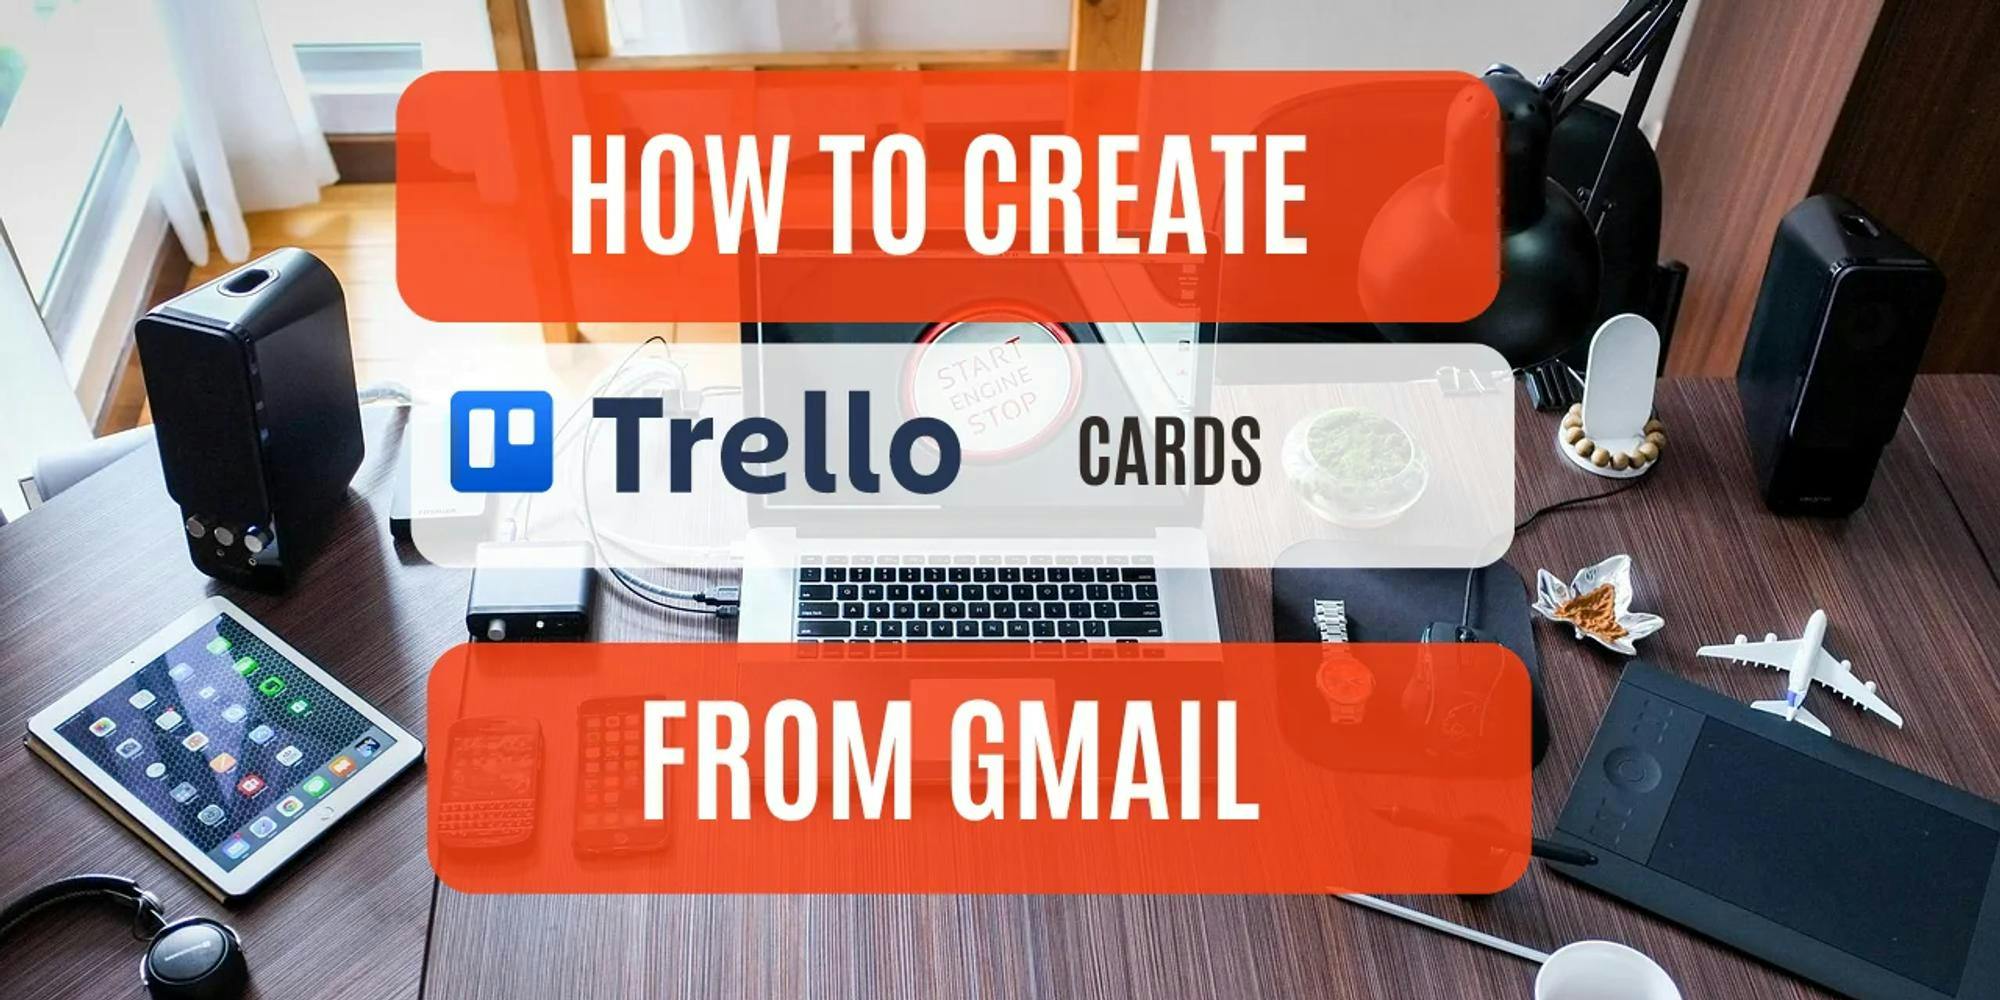 How To Create Trello Cards From Gmail Emails (And Why Using A Teamopipe Gmail CRM Might Be More Convenient)